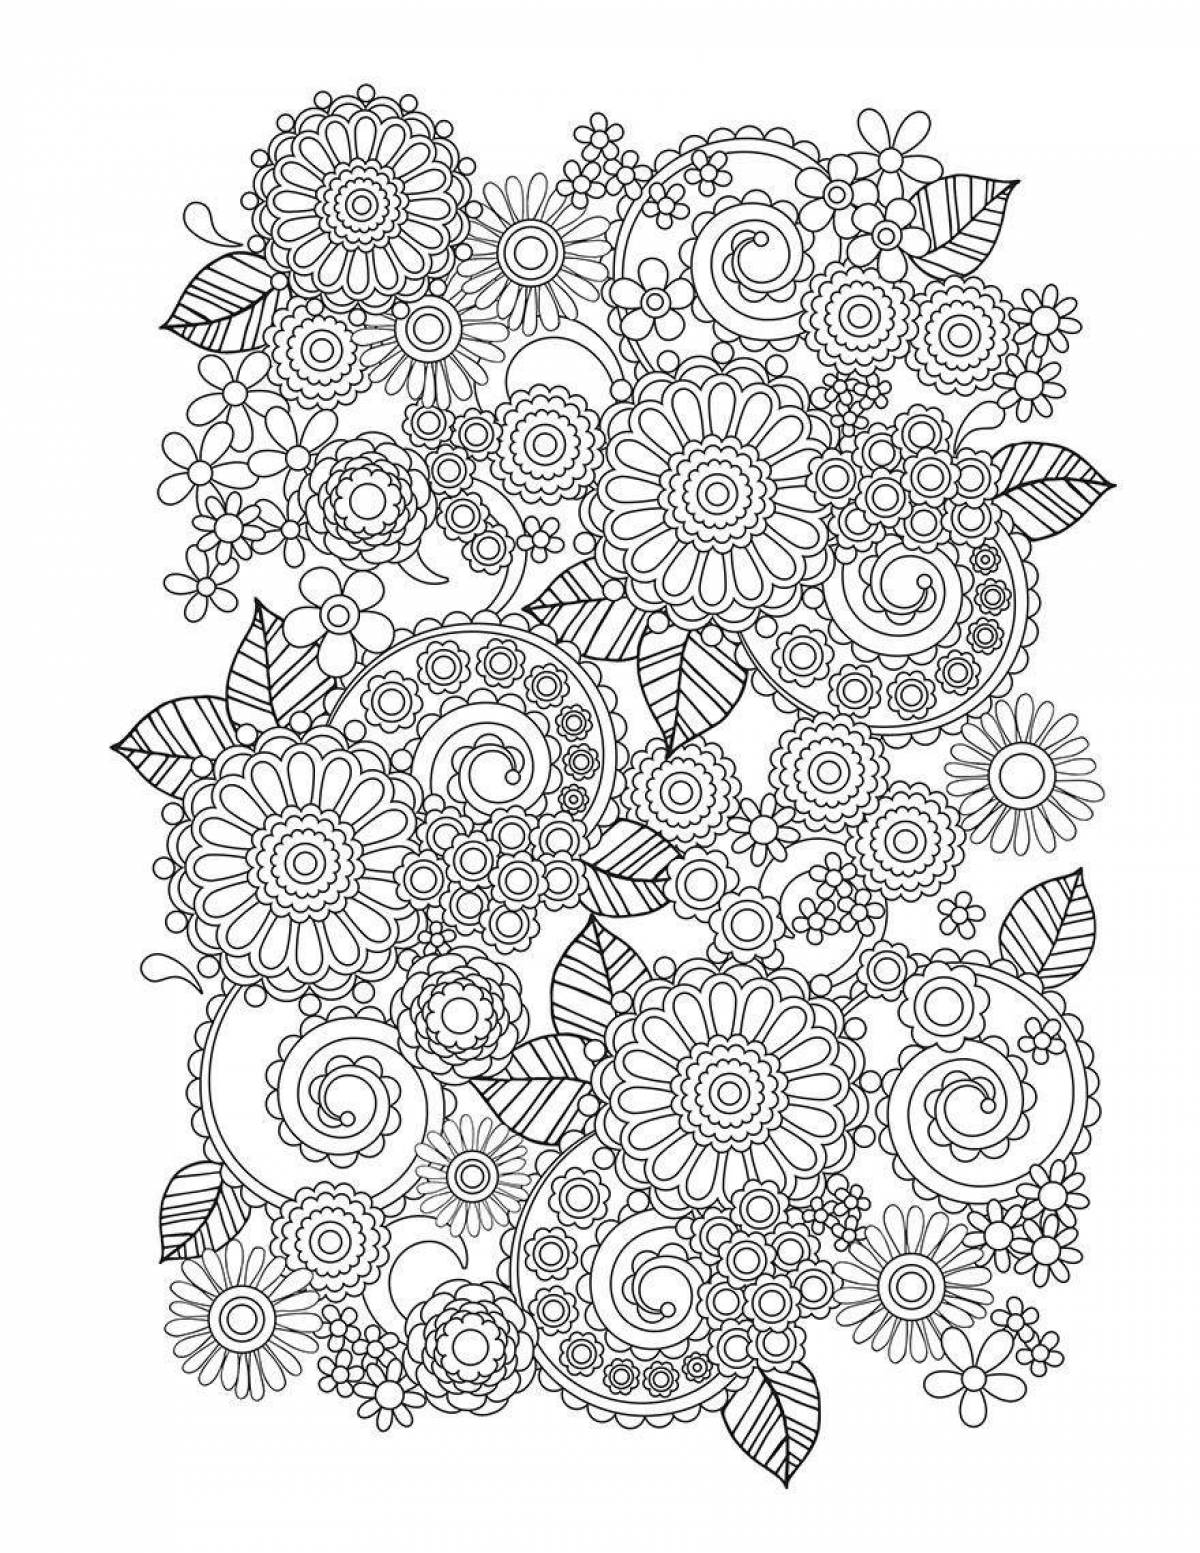 Intricate patterns coloring page - unique